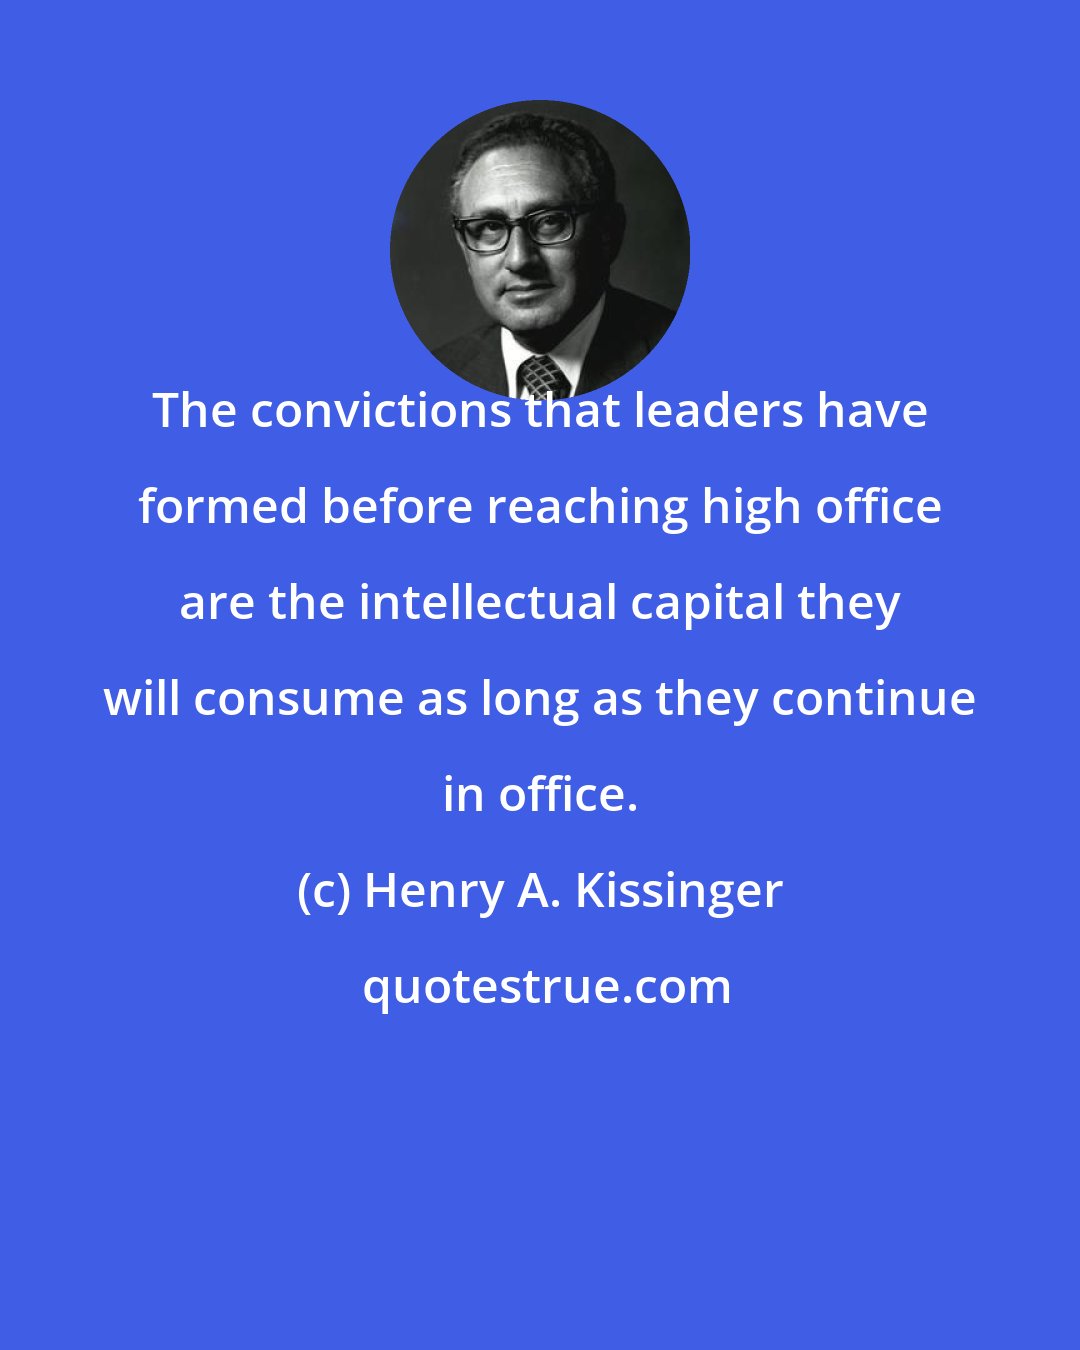 Henry A. Kissinger: The convictions that leaders have formed before reaching high office are the intellectual capital they will consume as long as they continue in office.